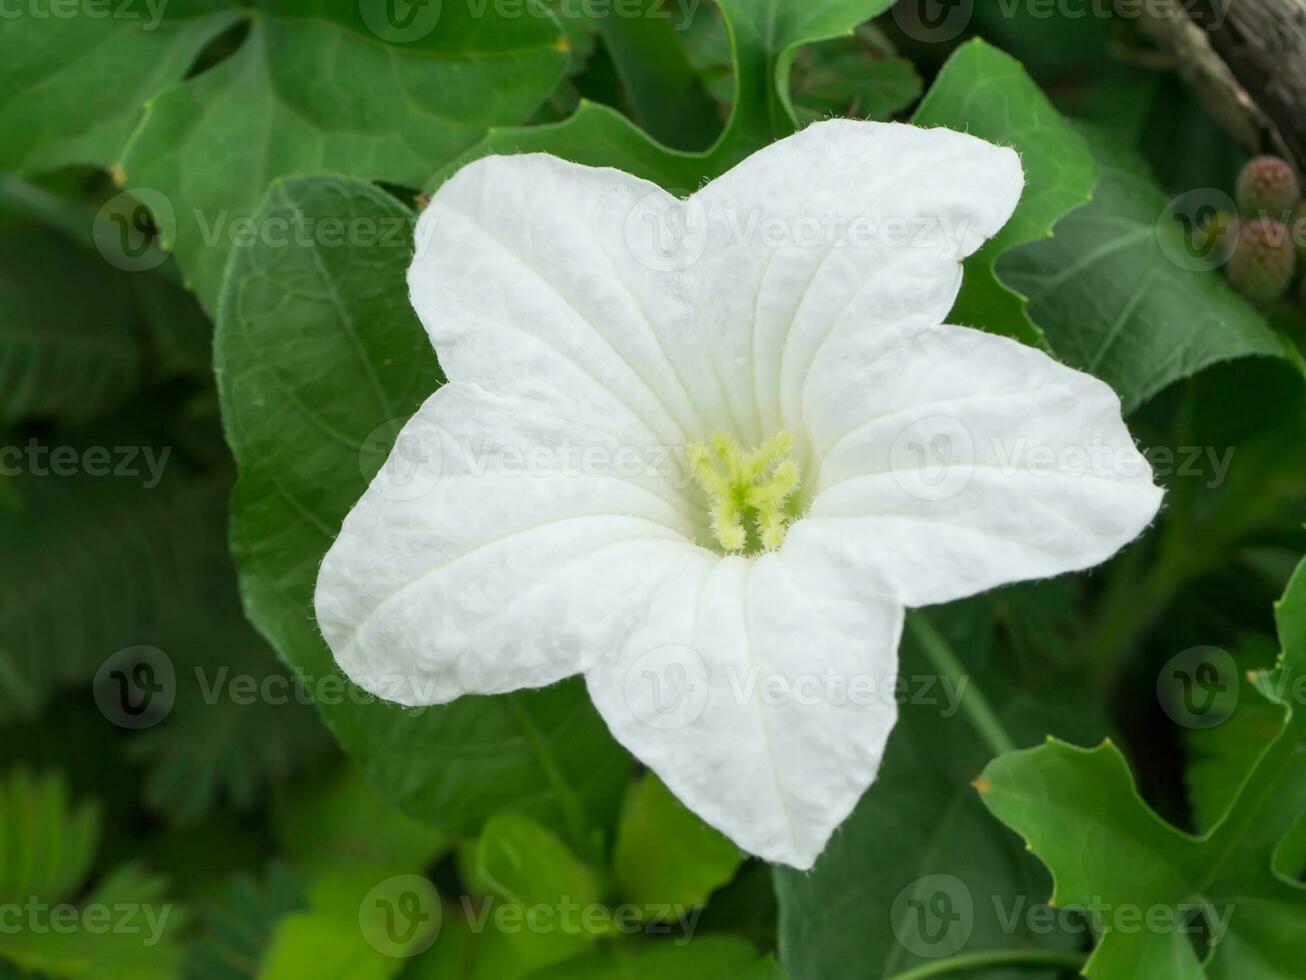 https://static.vecteezy.com/system/resources/previews/035/568/677/non_2x/white-ivy-flower-photo.jpg